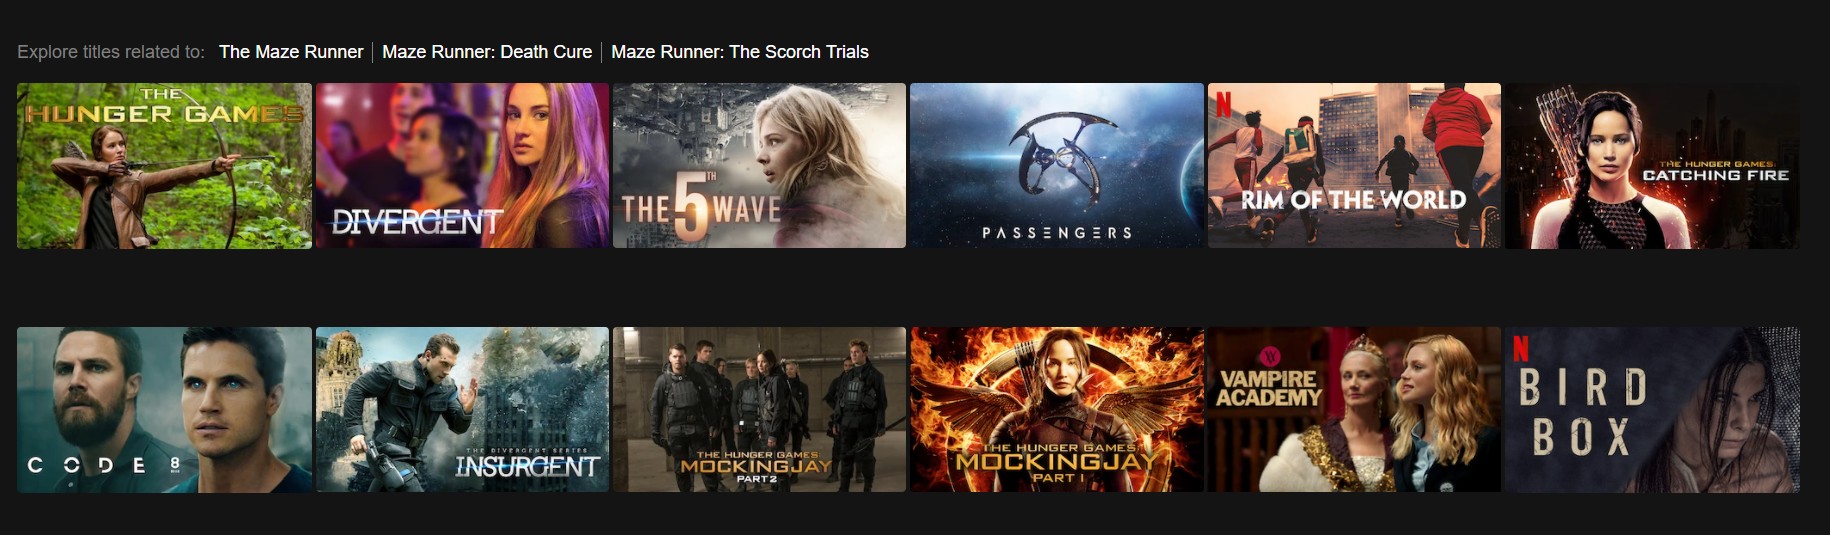 How to Watch All the 'Maze Runner' Movies in Order